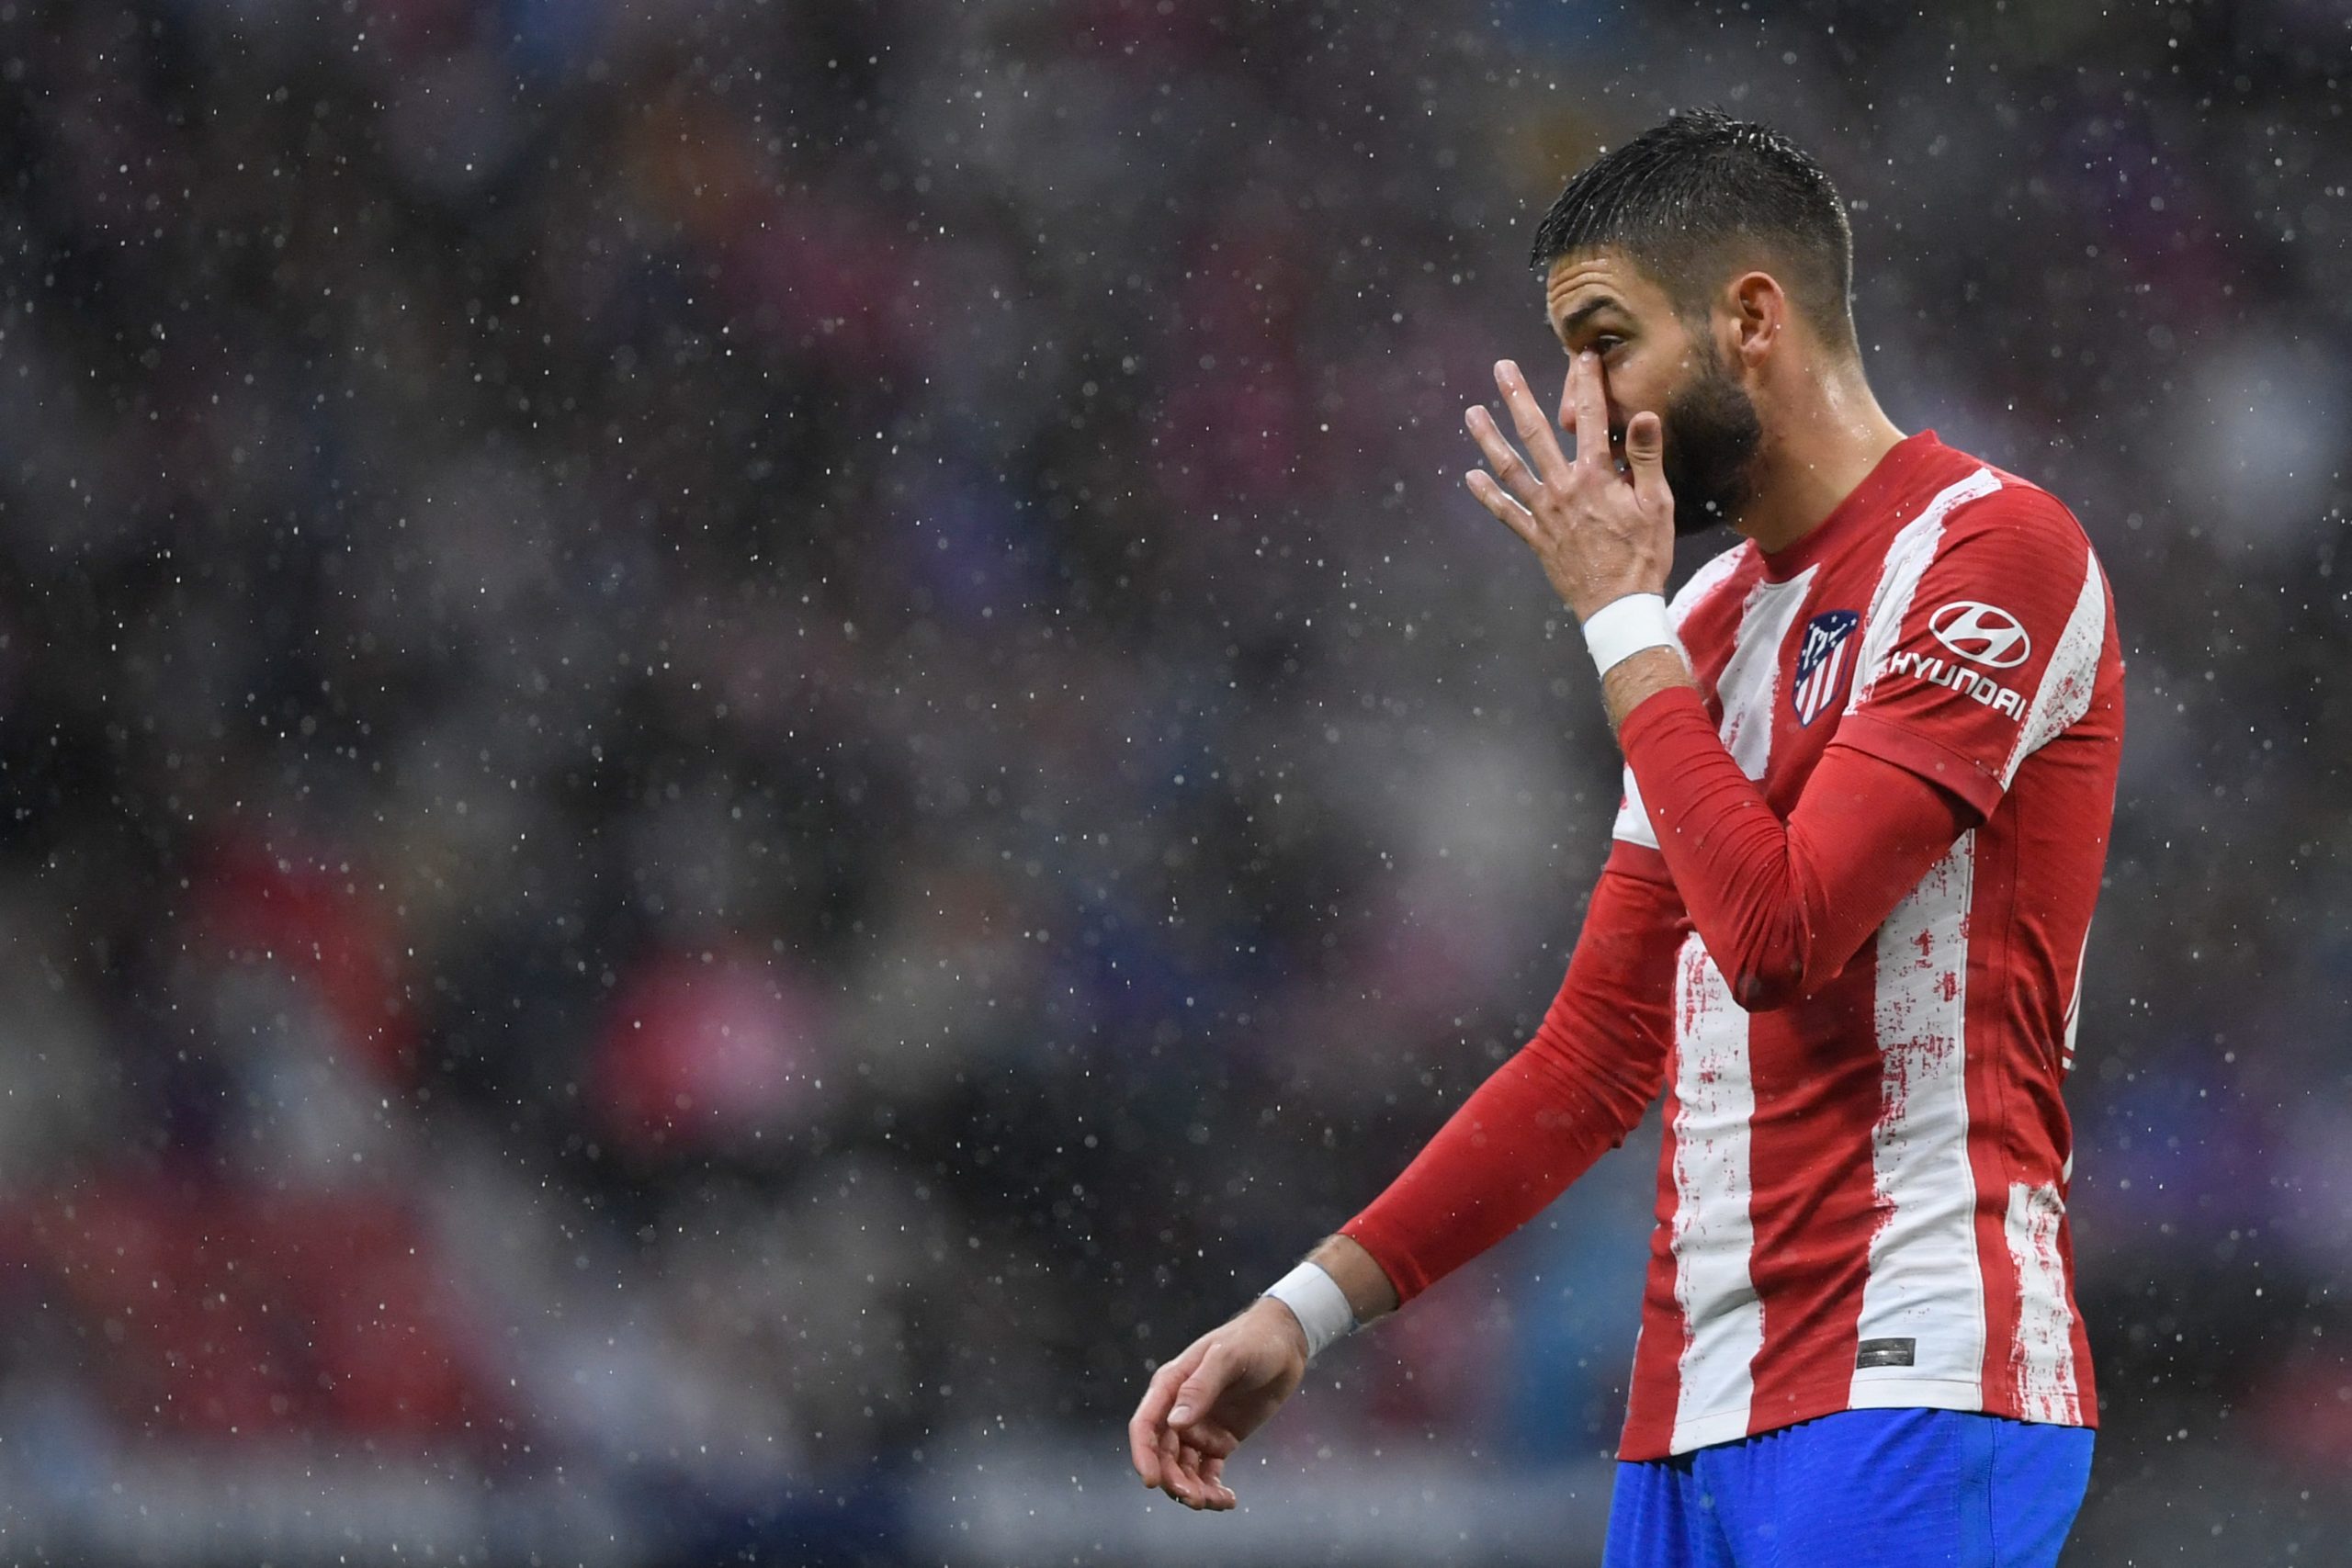 Tottenham Hotspur target Yannick Carrasco transfer-listed by Atletico Madrid.